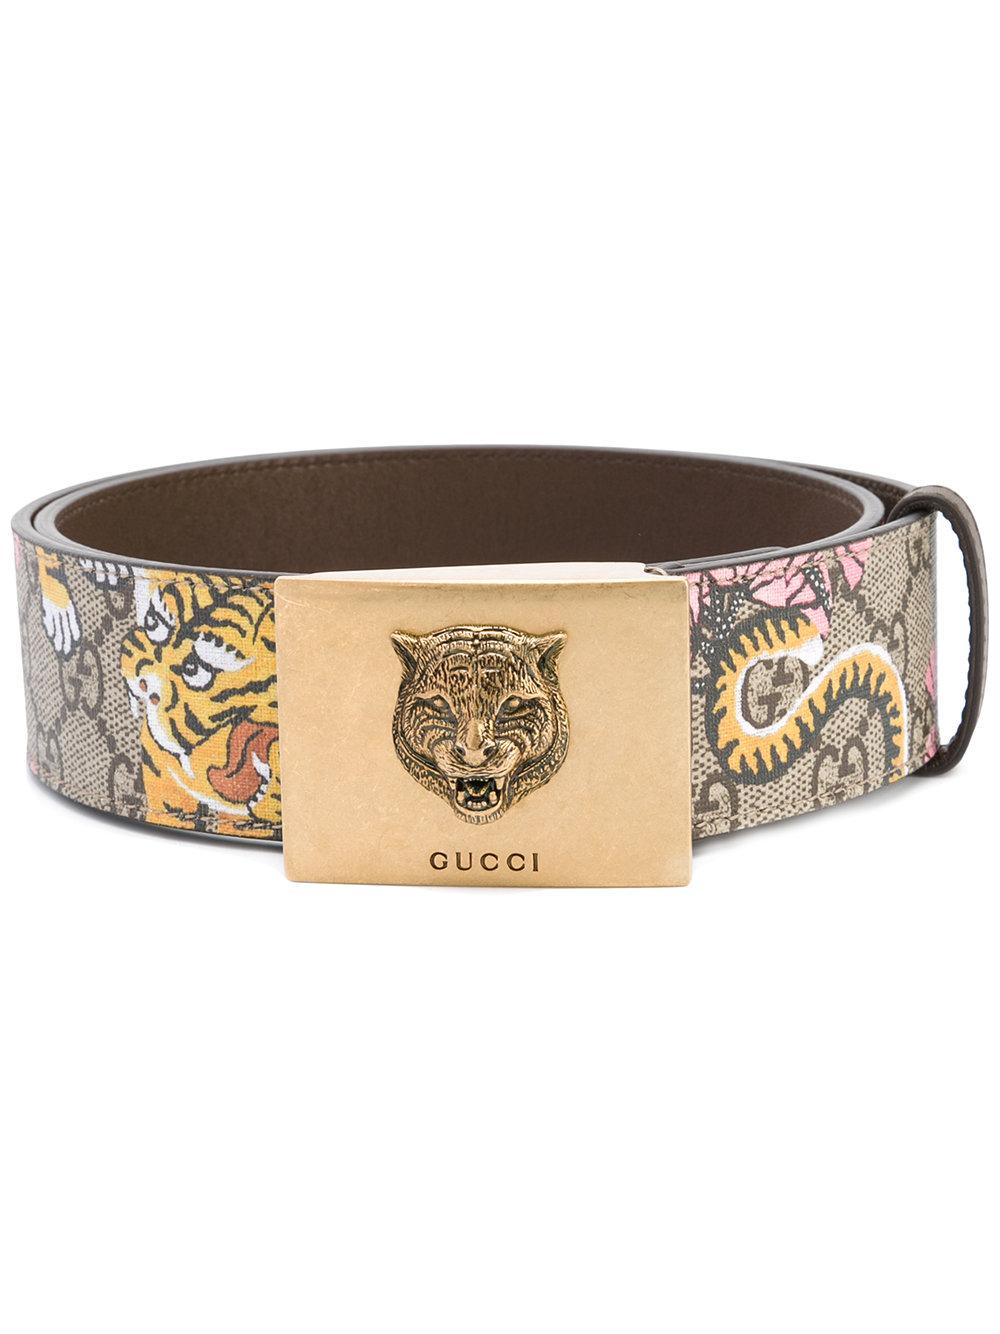 Gucci Bengal Gg Supreme Belt in Natural | Lyst